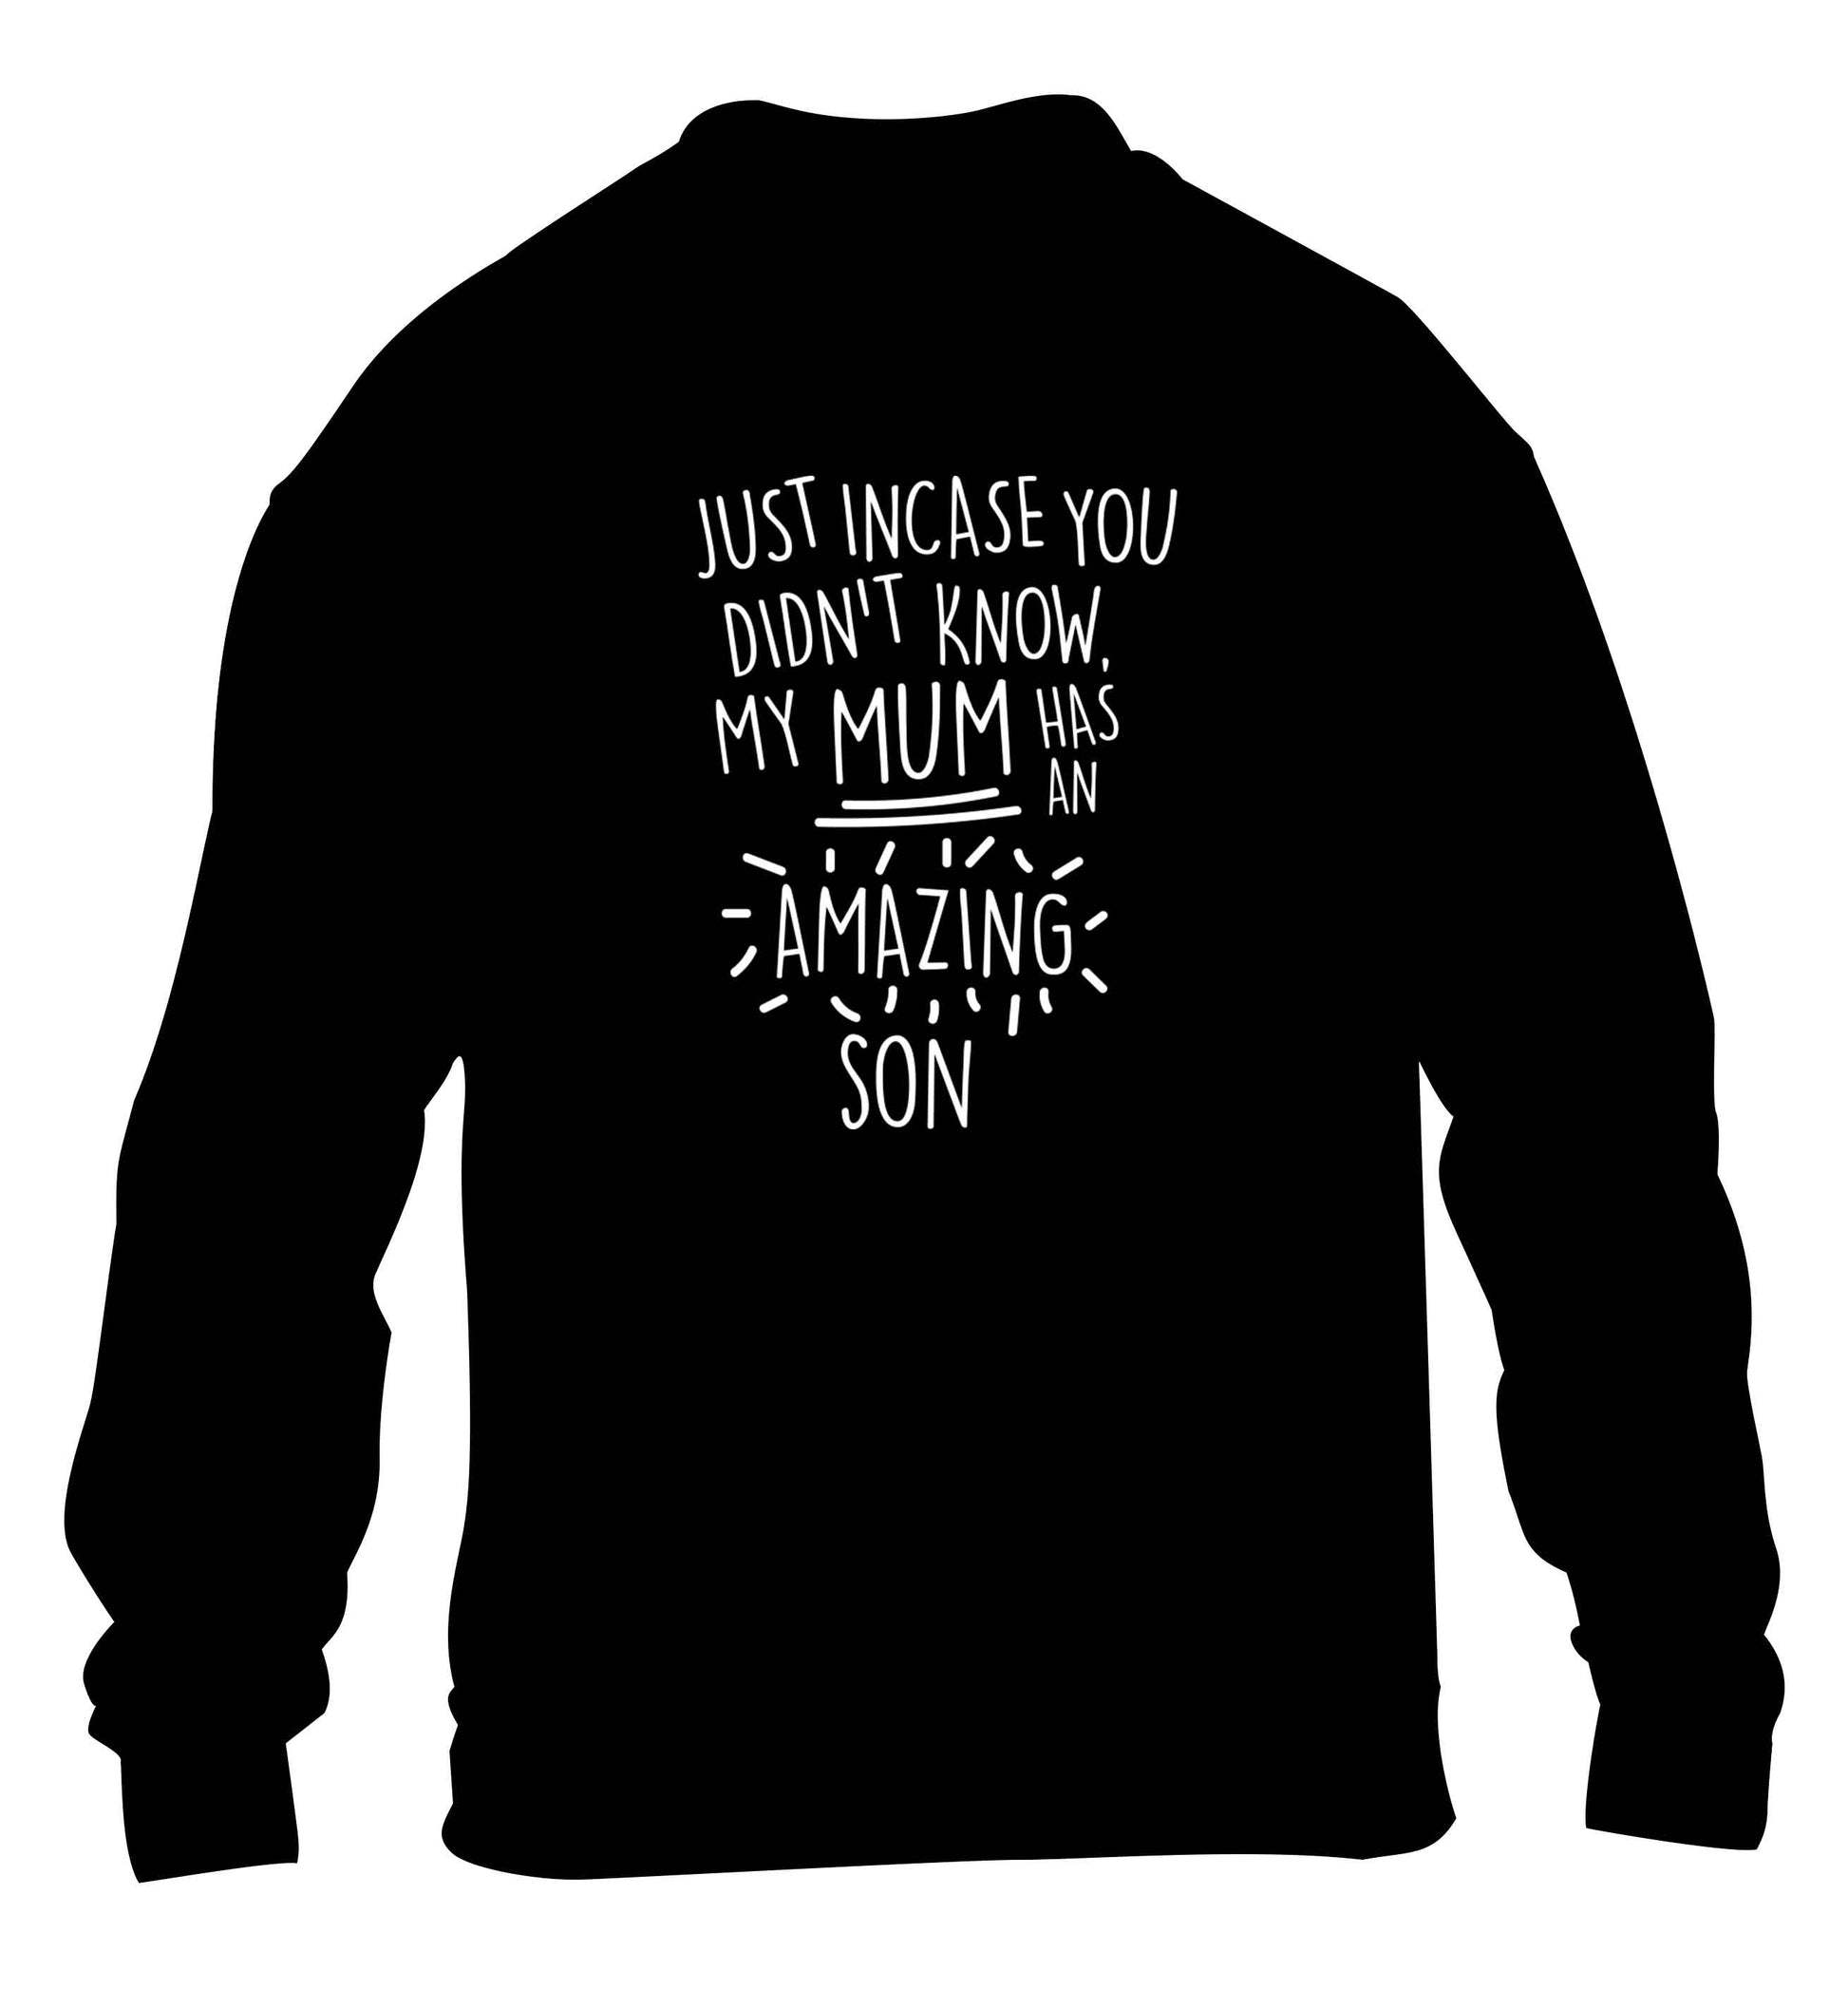 Just incase you didn't know my mum has an amazing son children's black sweater 12-13 Years